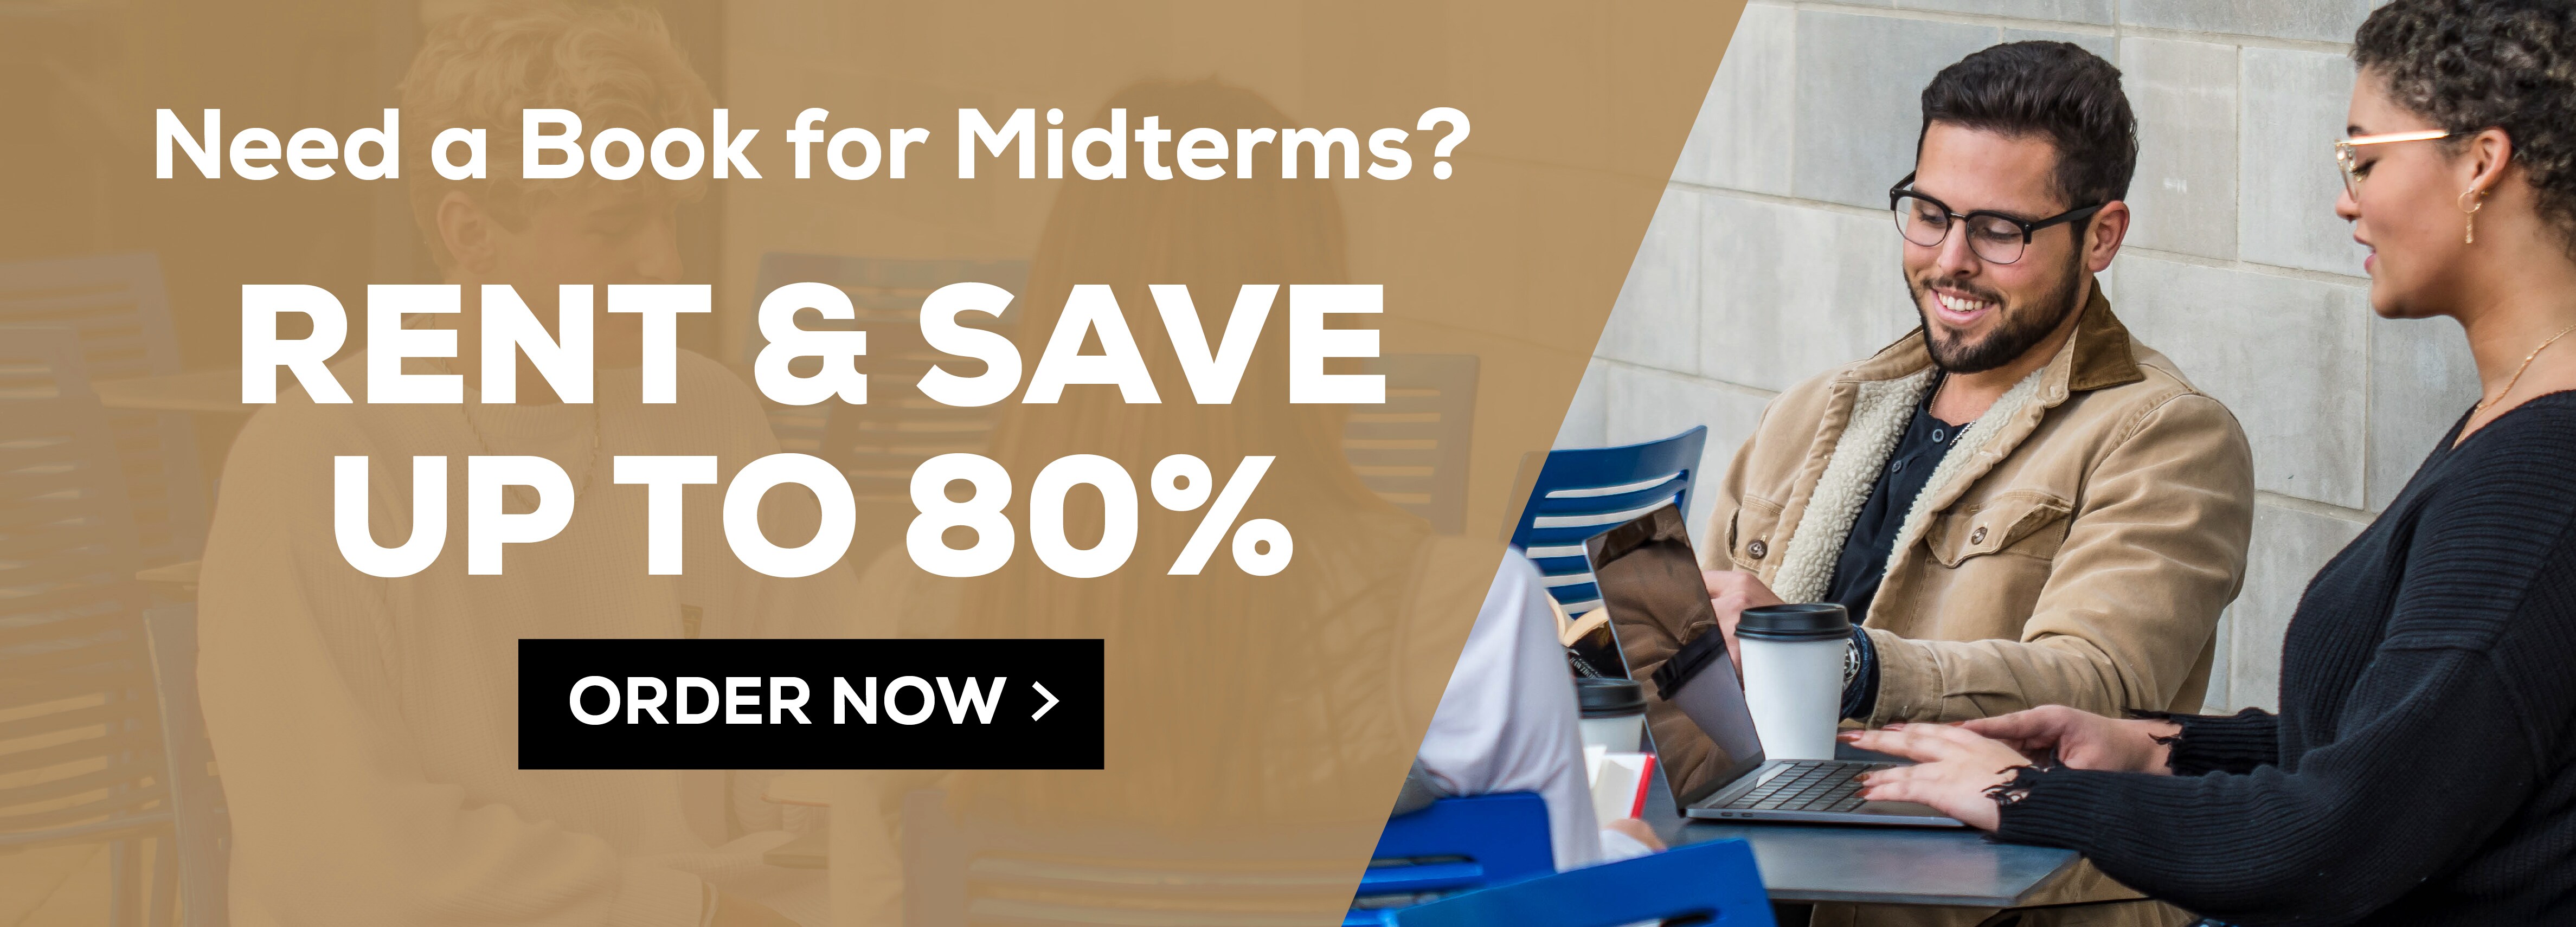 Need a book for Midterms? Rent and save up to 80%. Order Now.